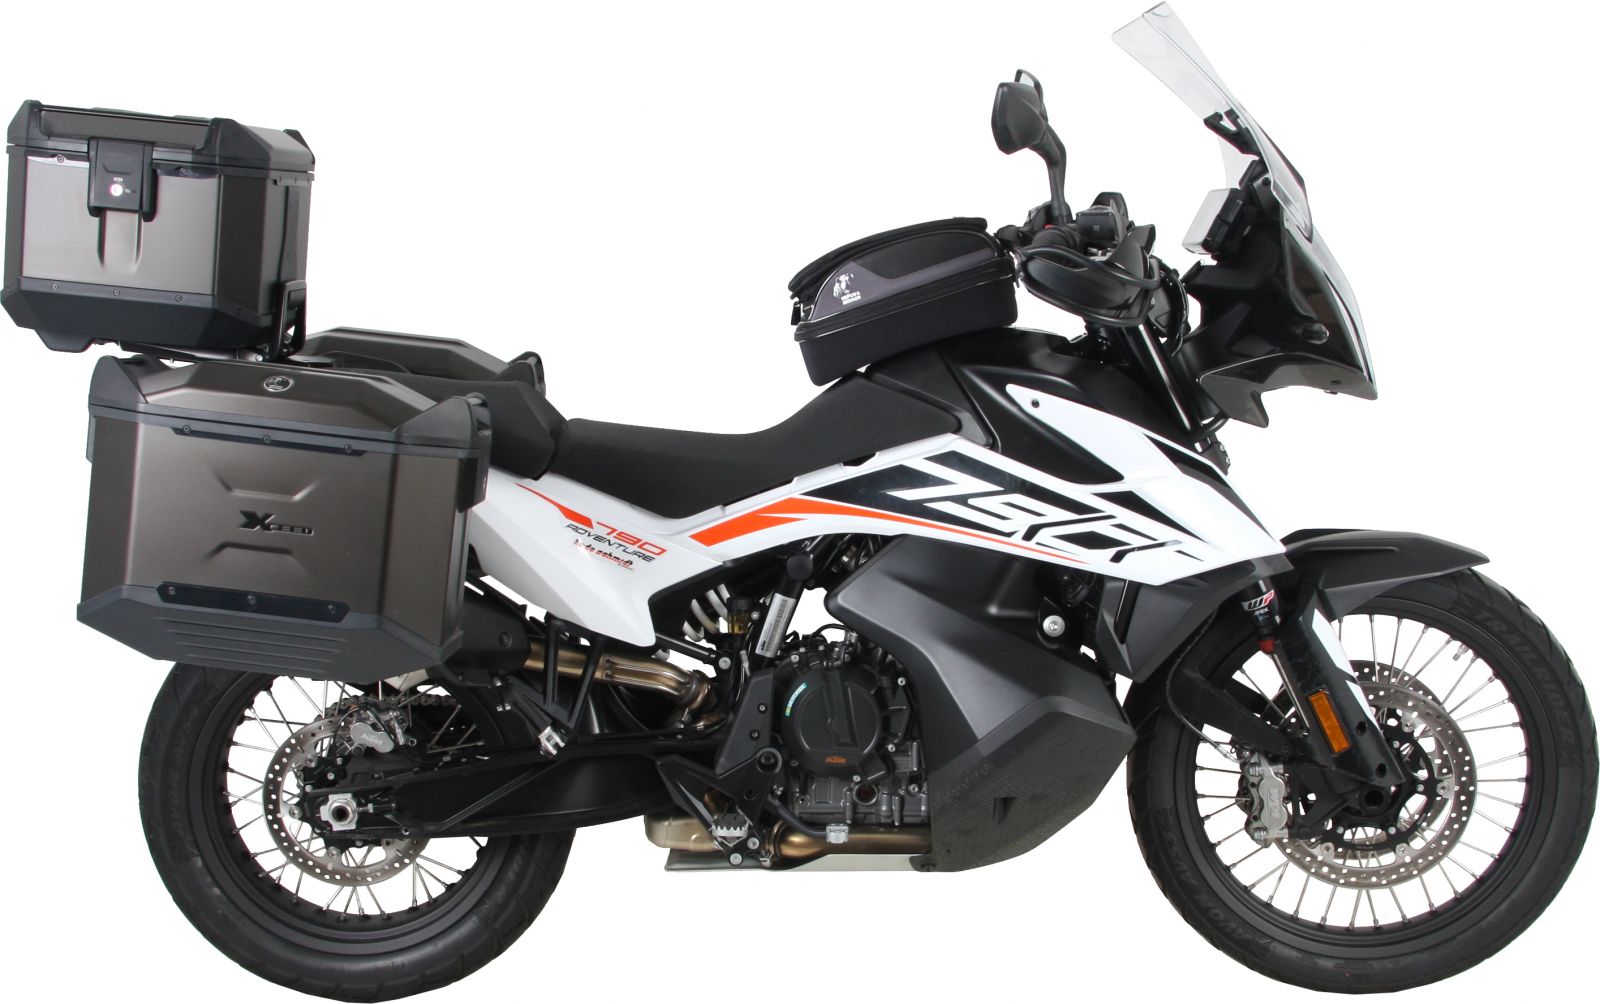 KTM 790 Perfect riding accessories for your next adventure